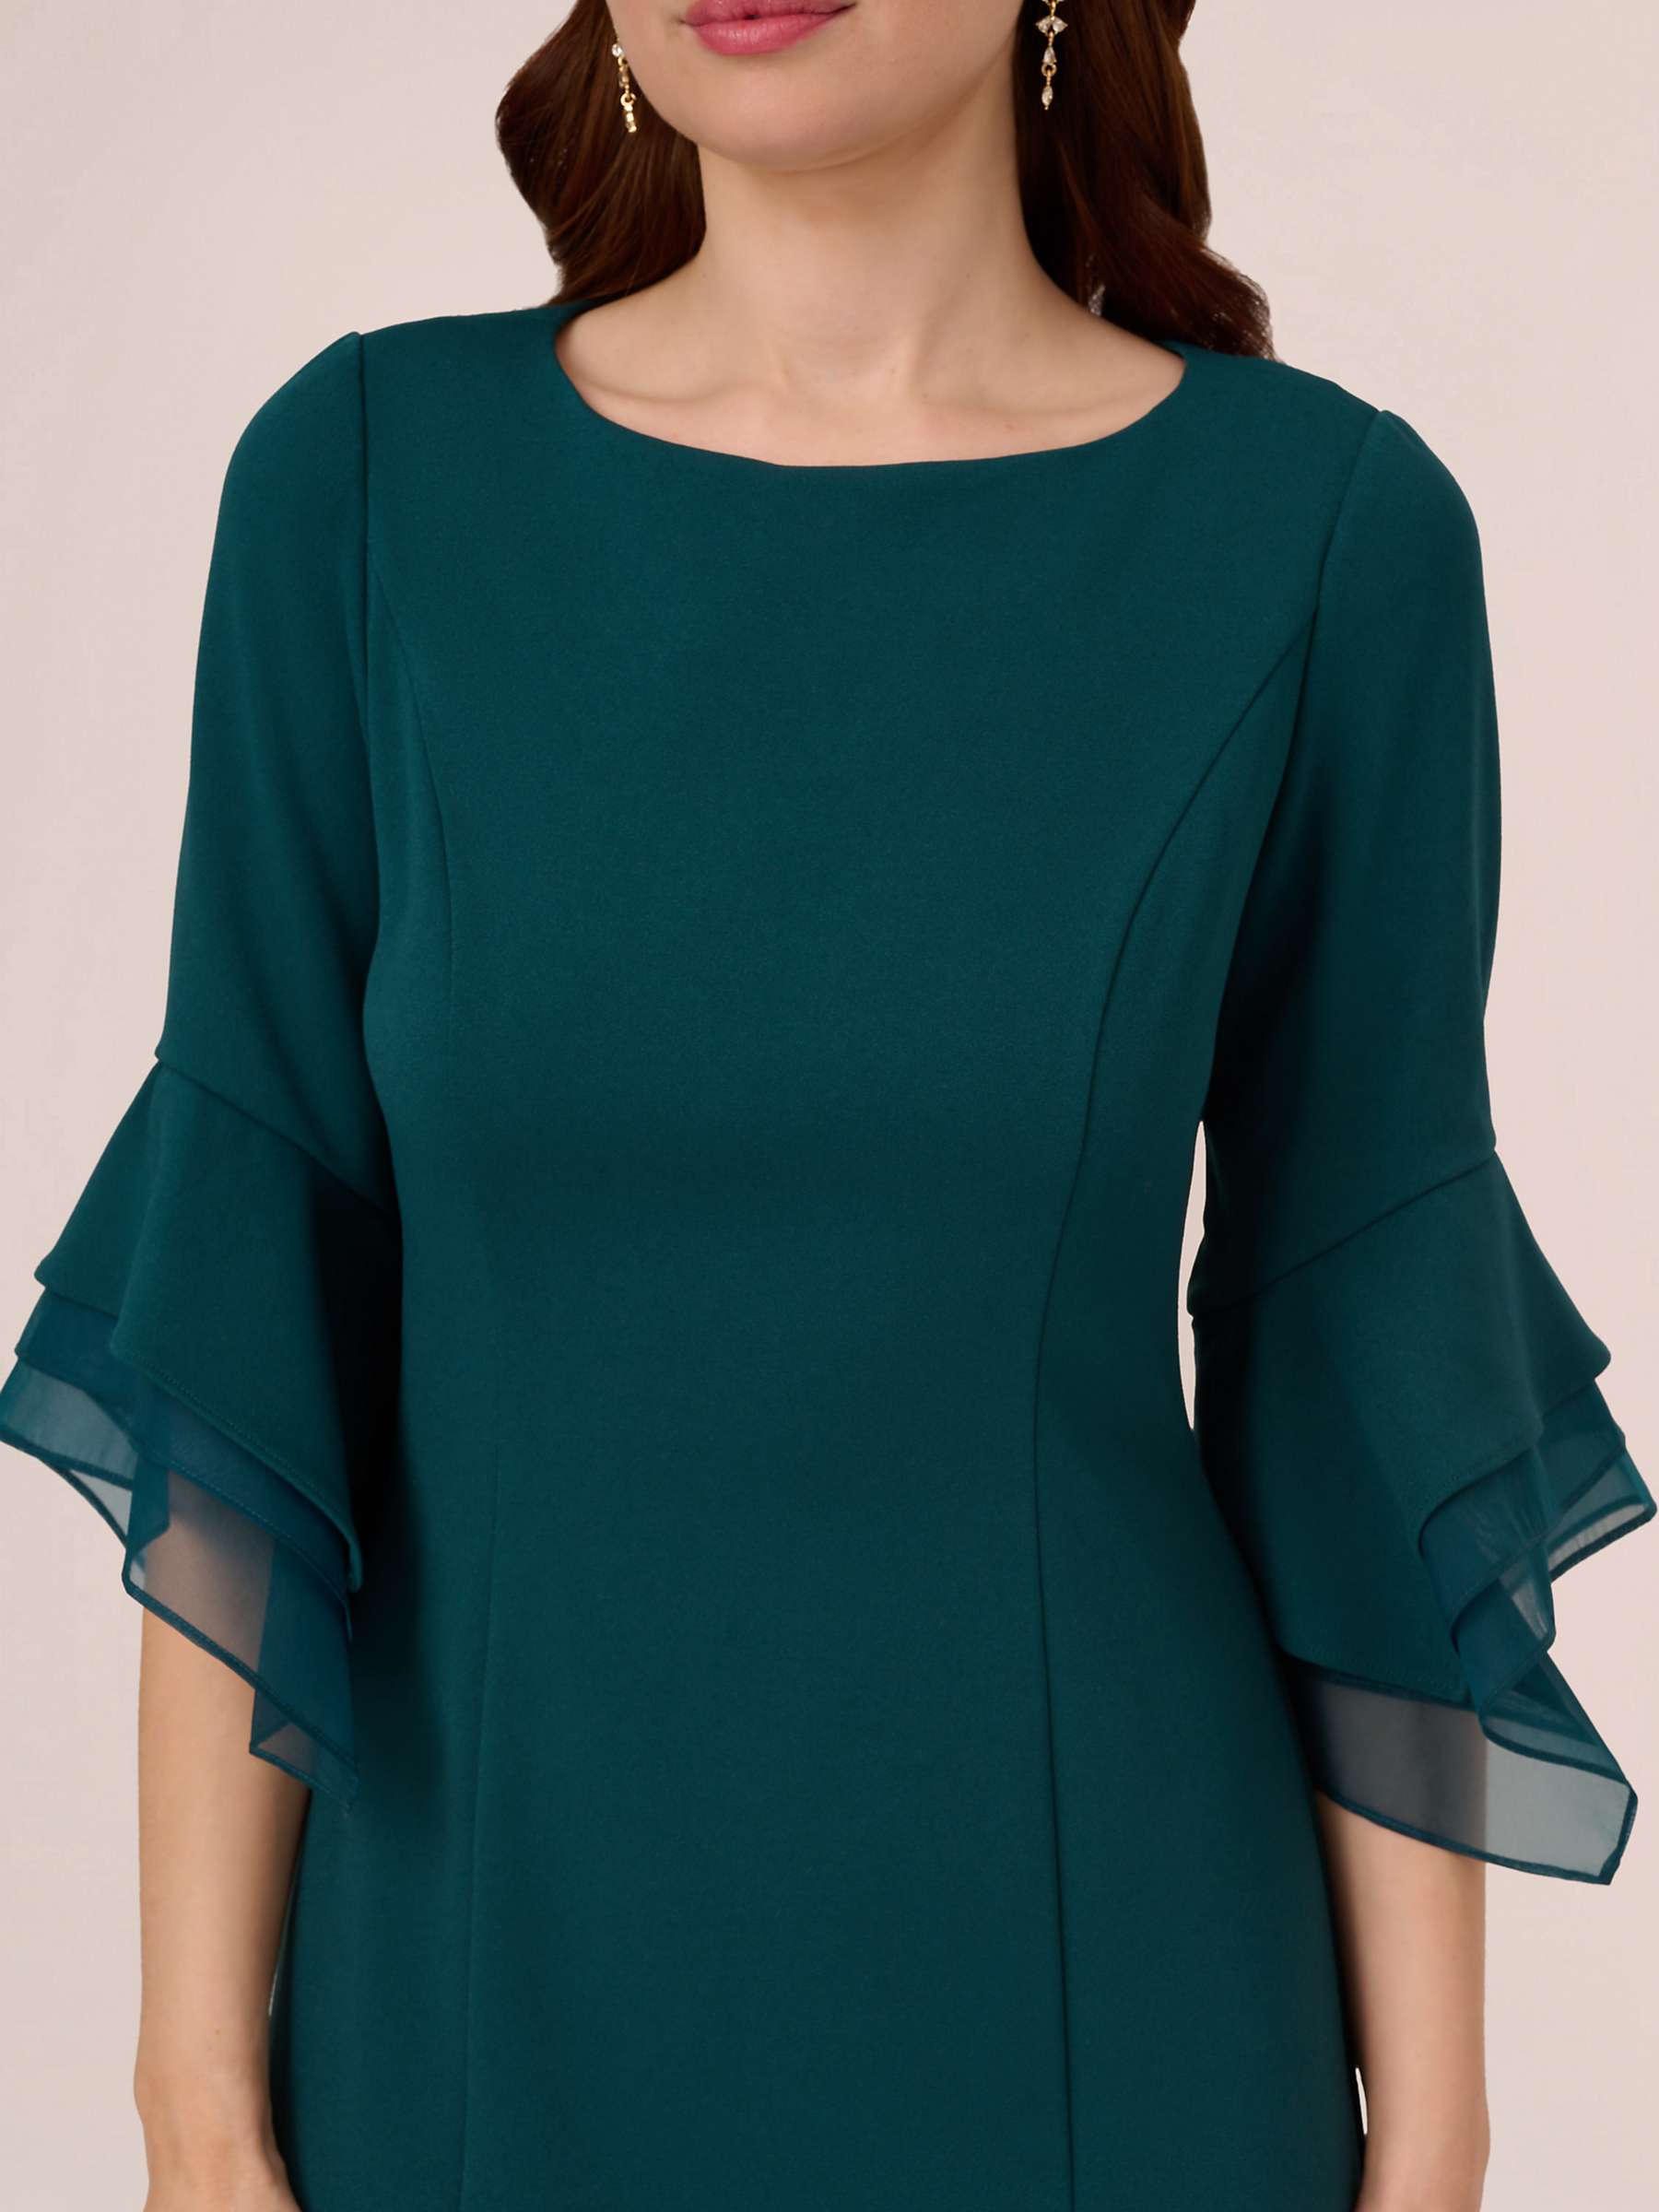 Buy Adrianna Papell Crepe Tiered Sleeve Dress, Hunter Online at johnlewis.com